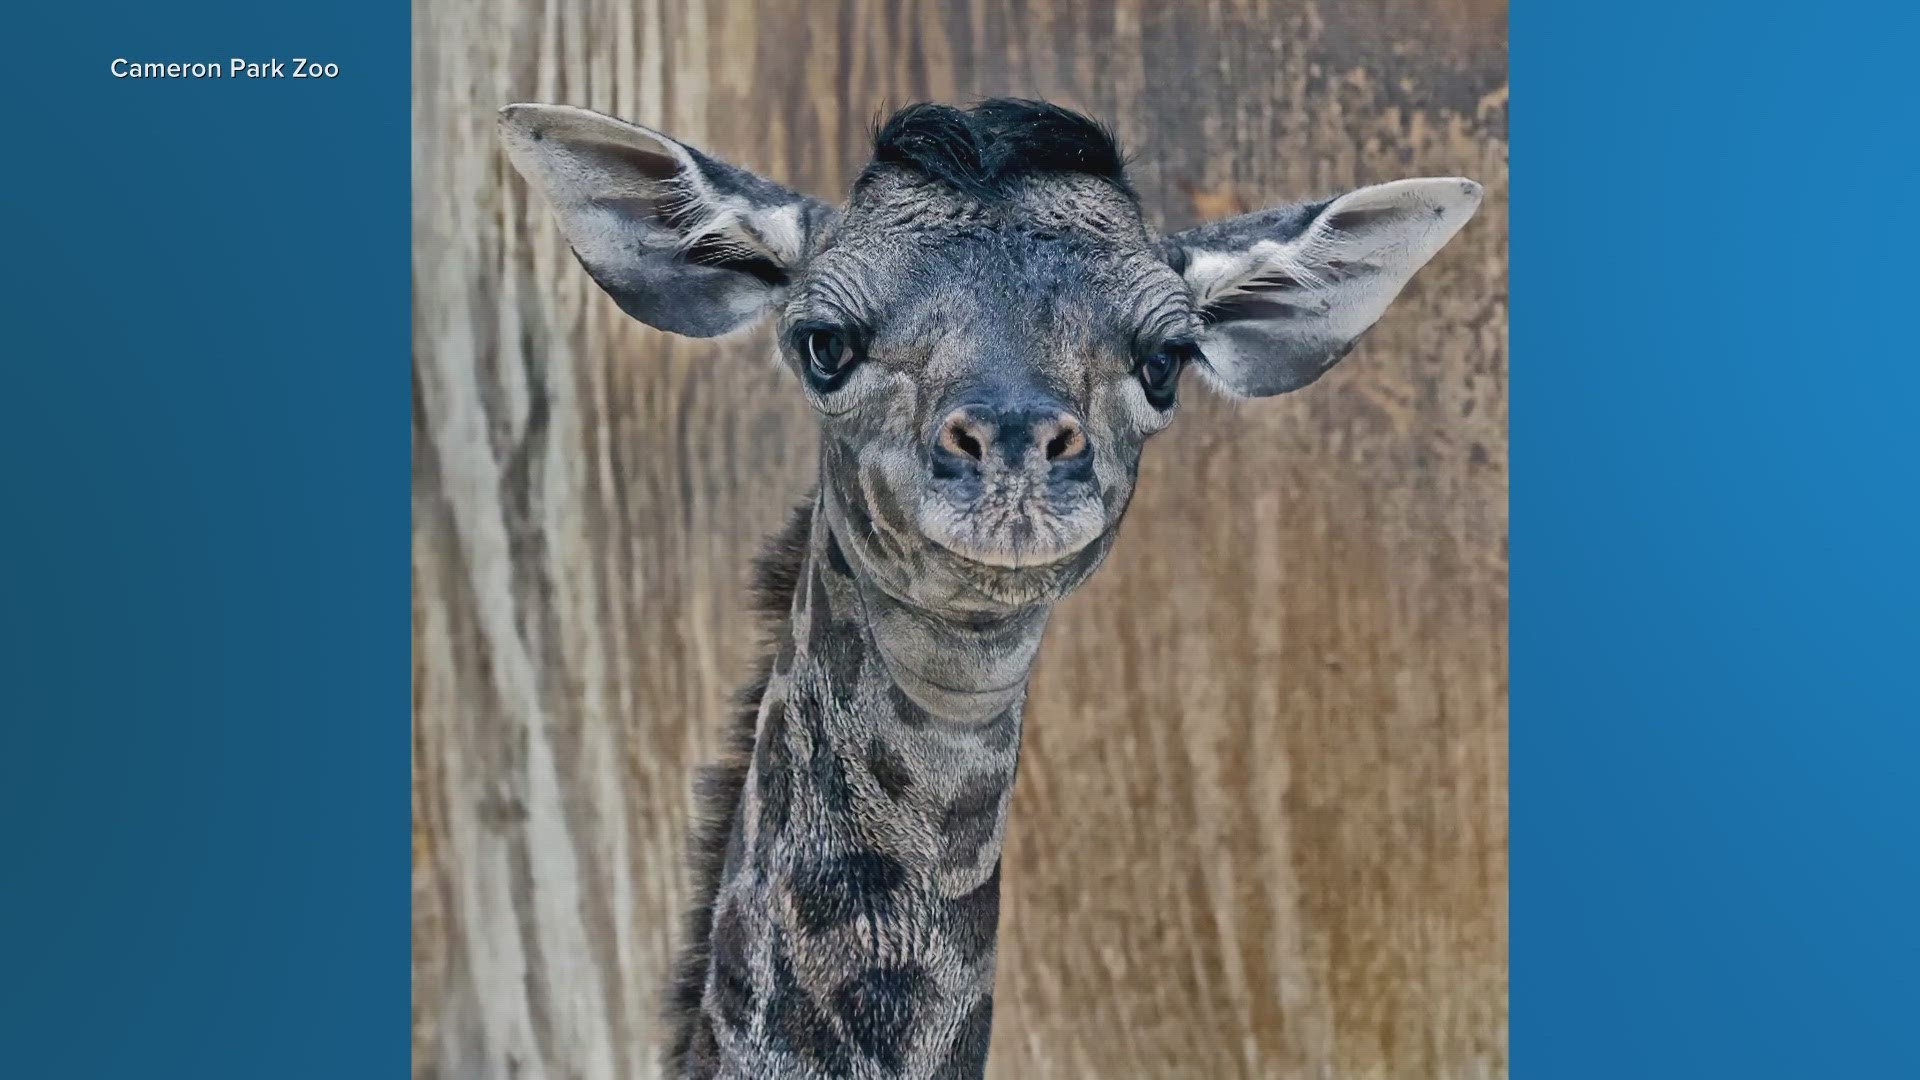 Zuri, who was less than a month old, died just days after her mother, Penelope.